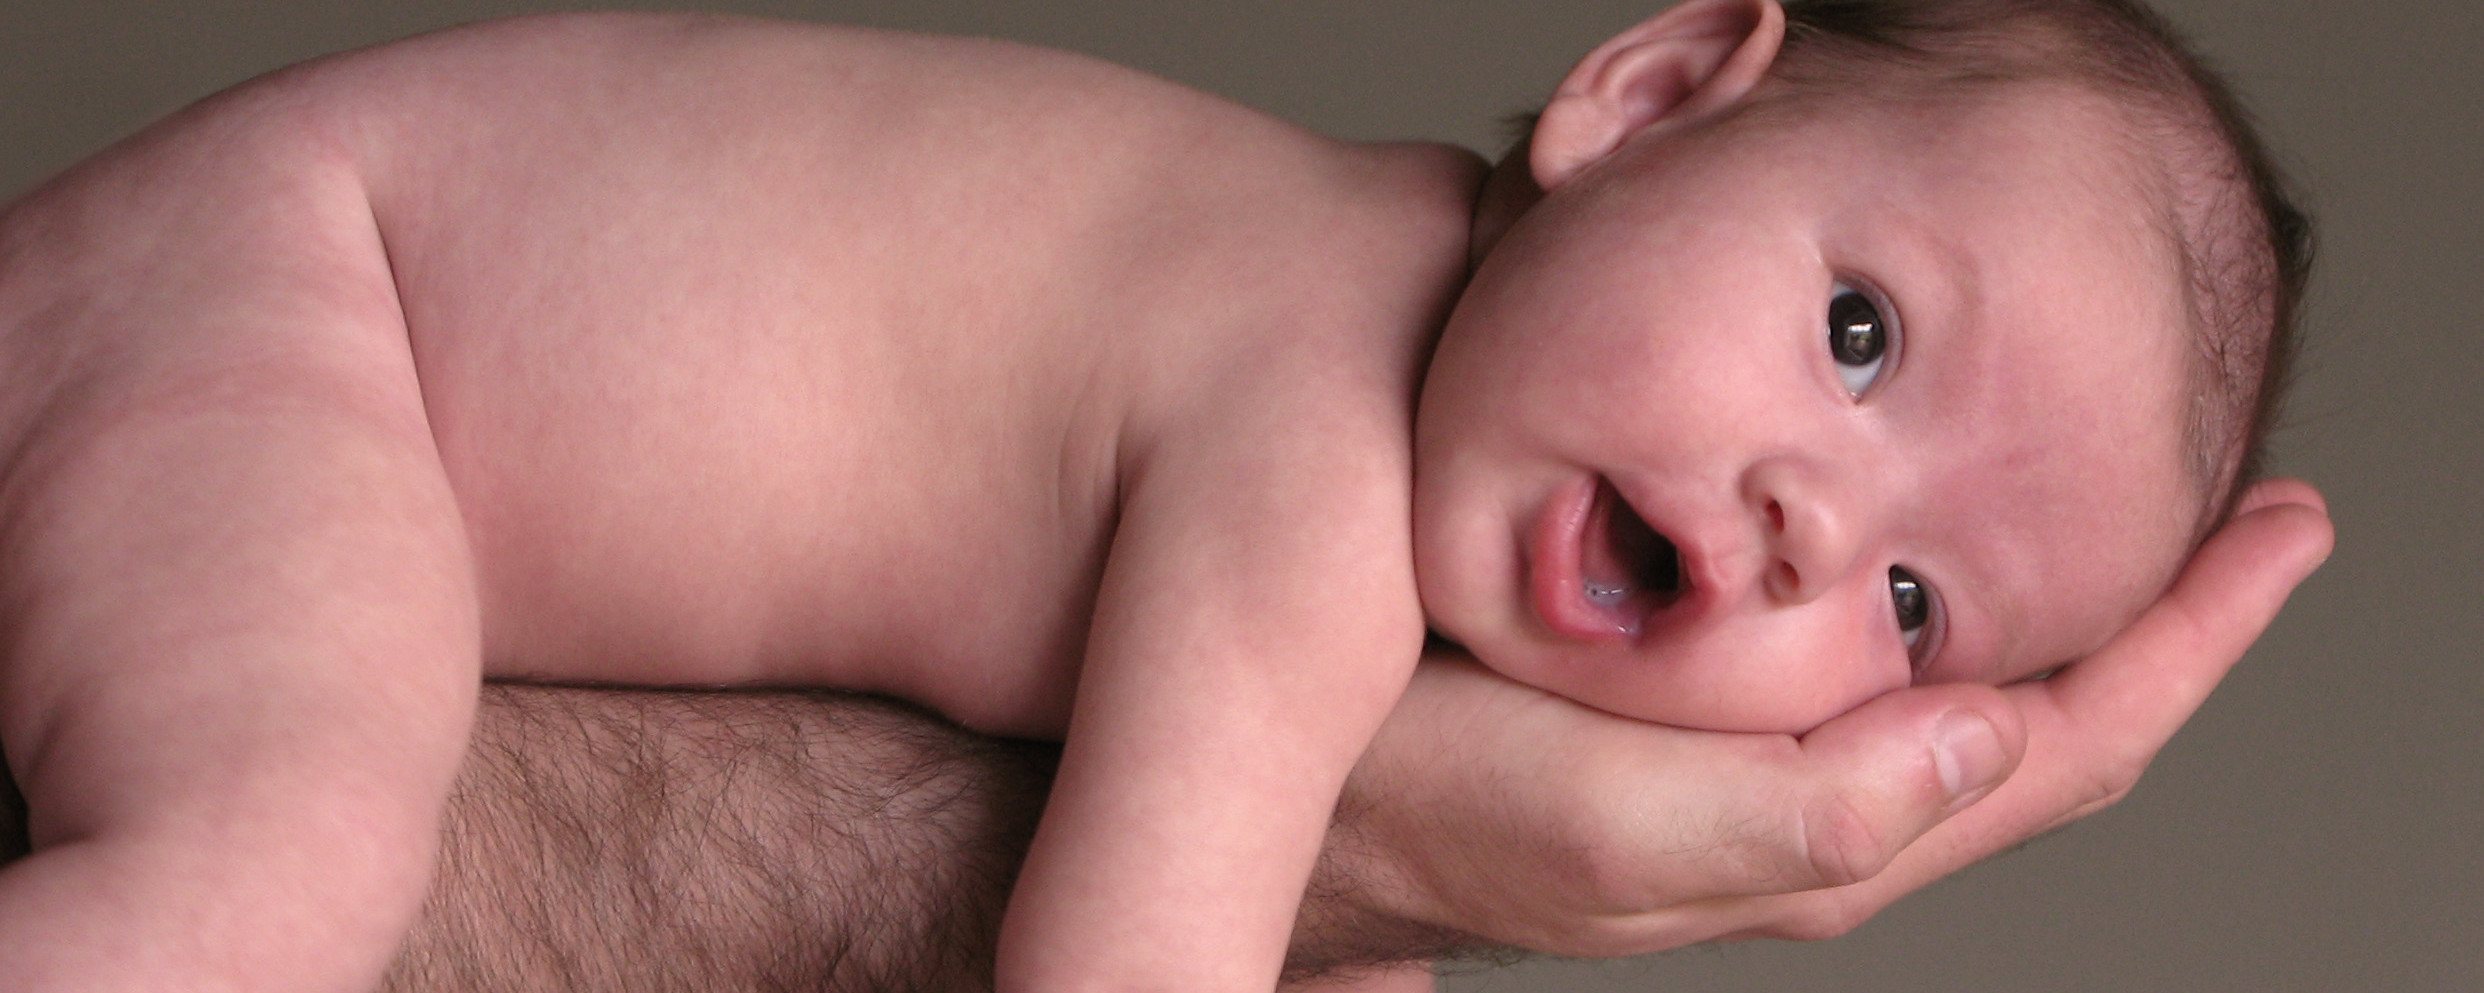 New Dads: How to Bond With Your Baby?